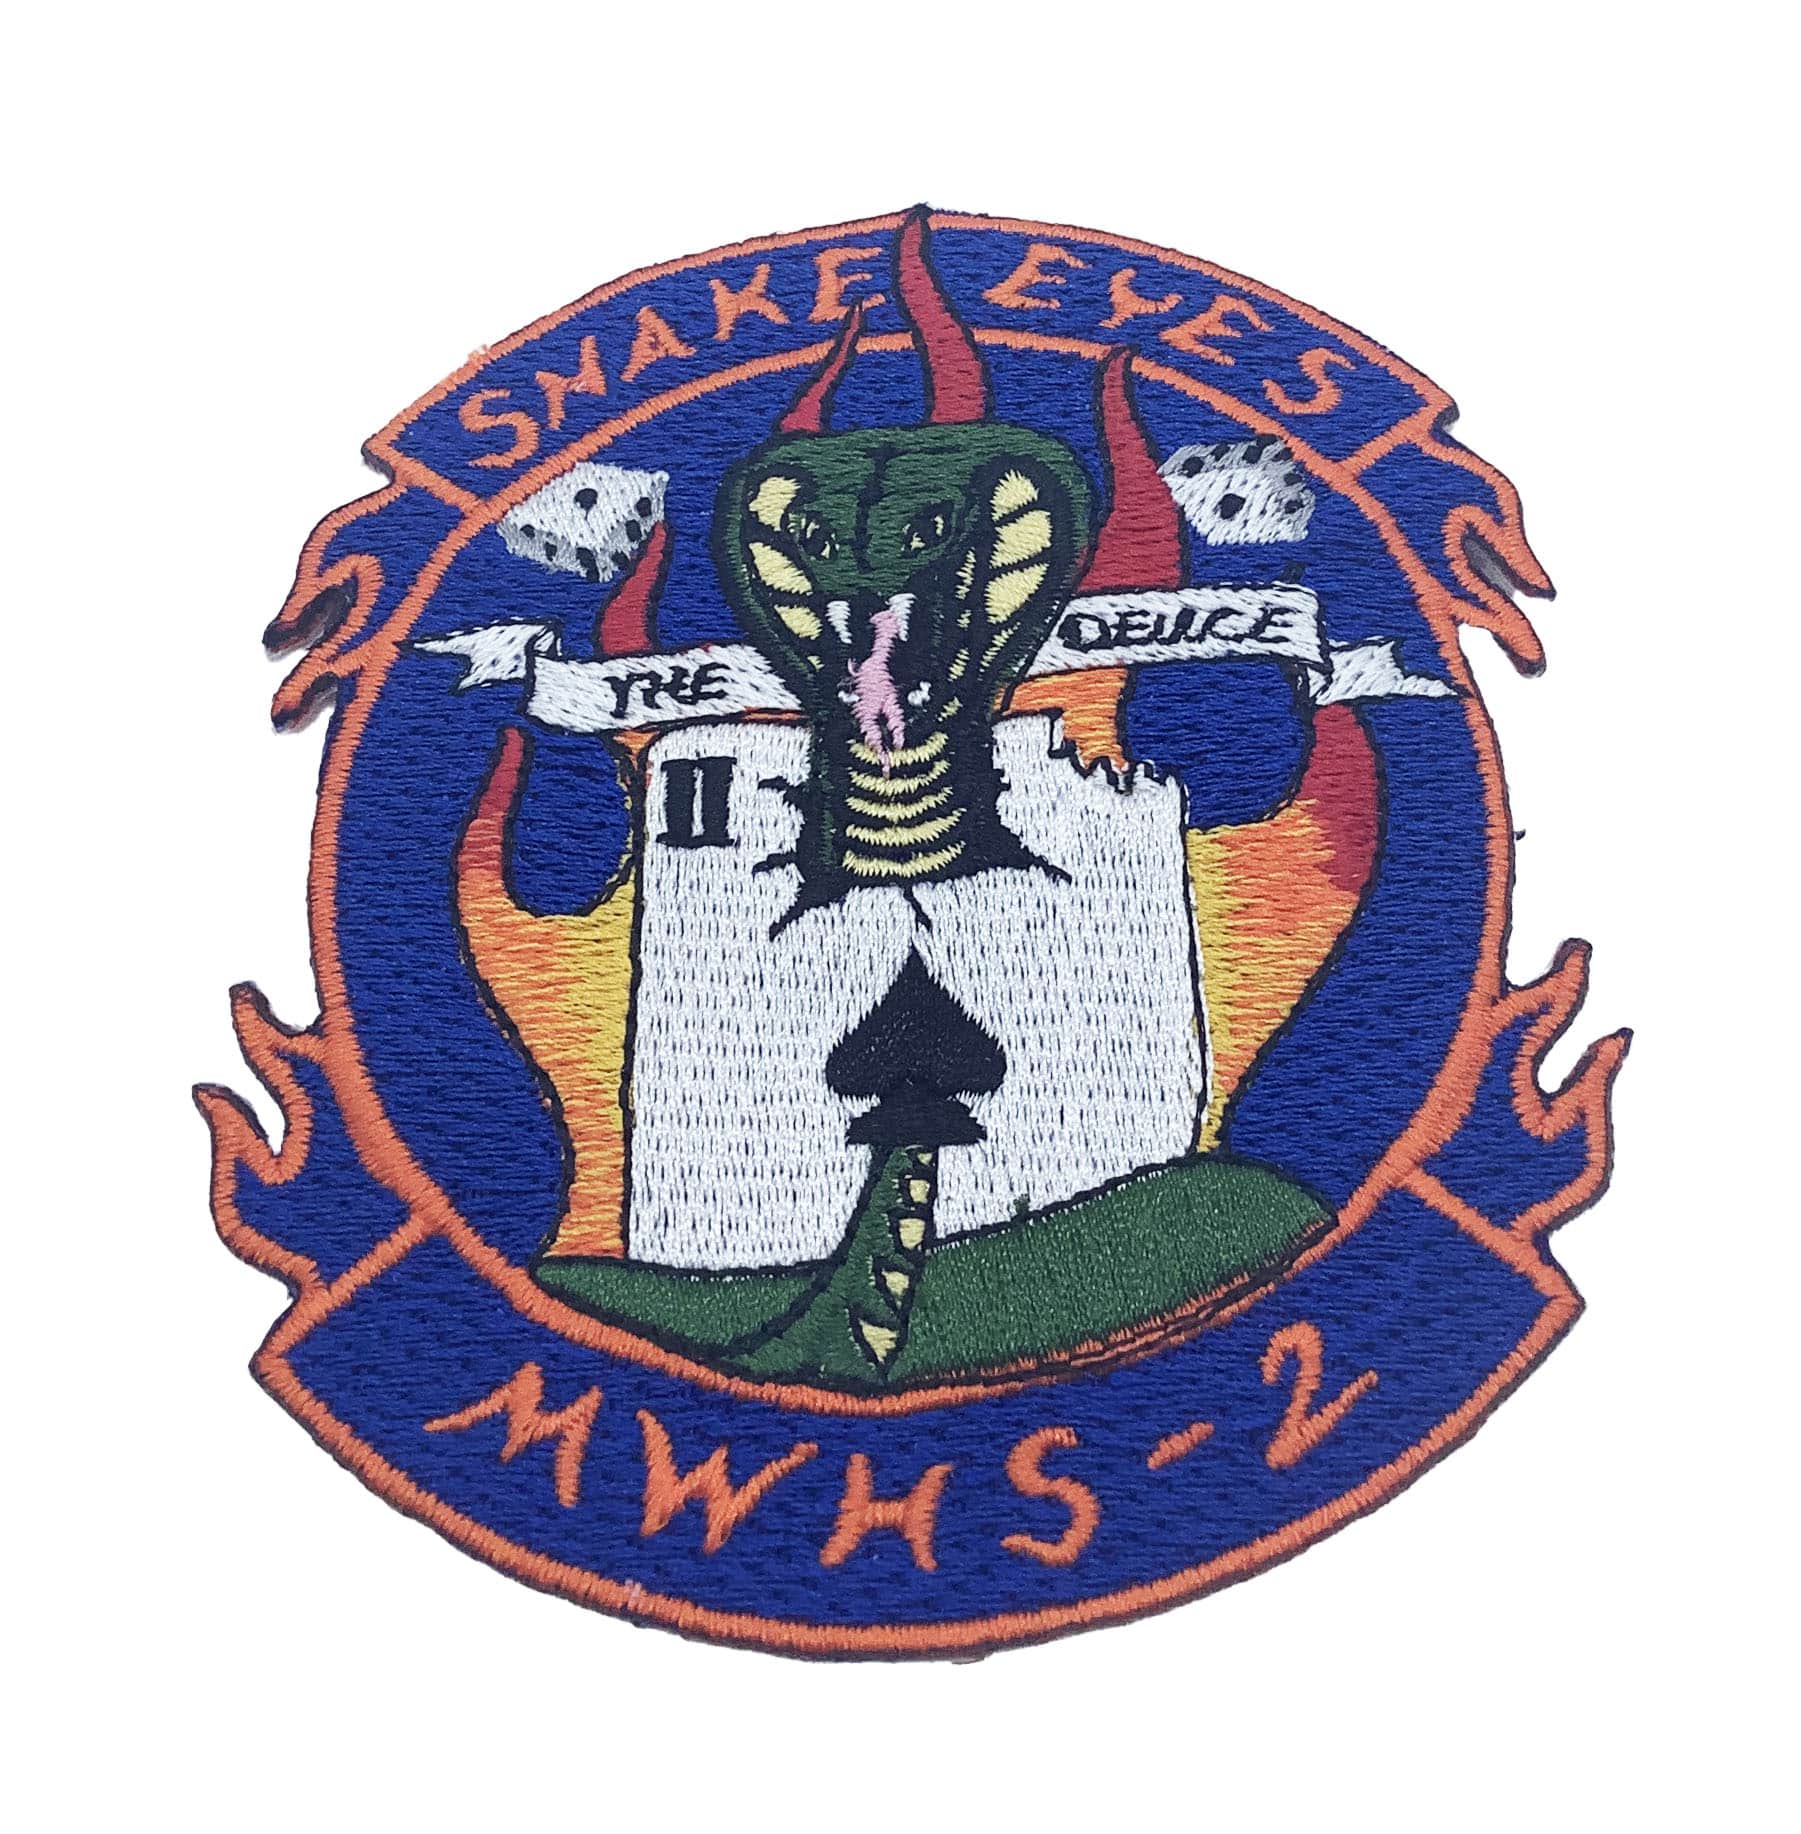 MWHS-2 Snake Eyes Patch – No Hook and Loop